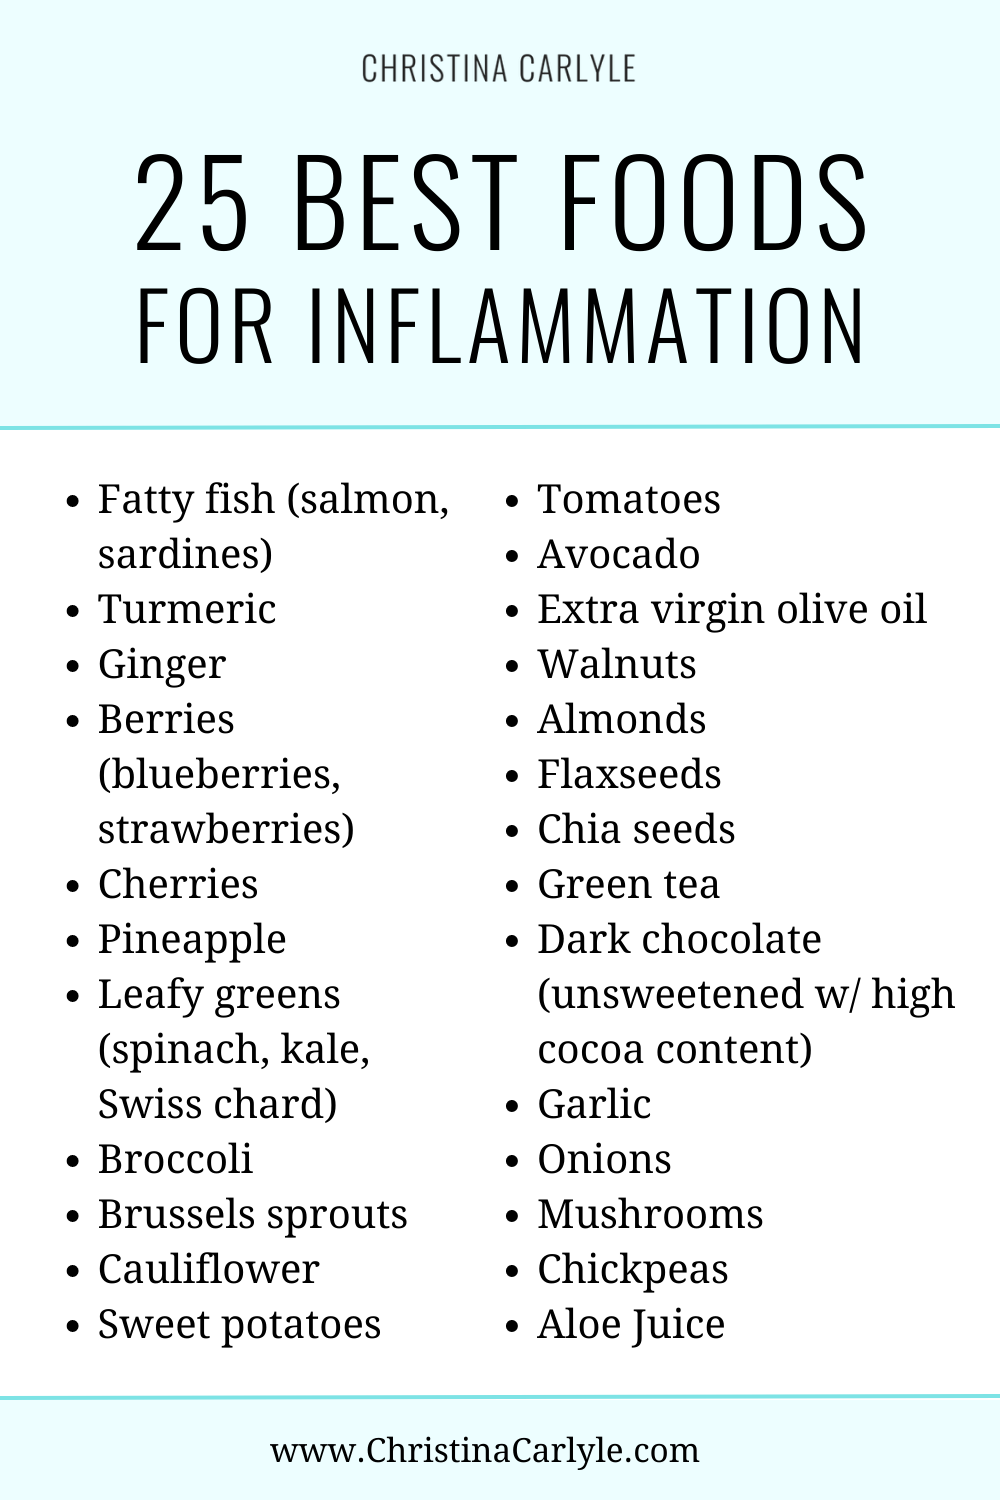 text that says 25 BEST FOODS FOR INFLAMMATION and the 25 best anti inflammatory foods listed